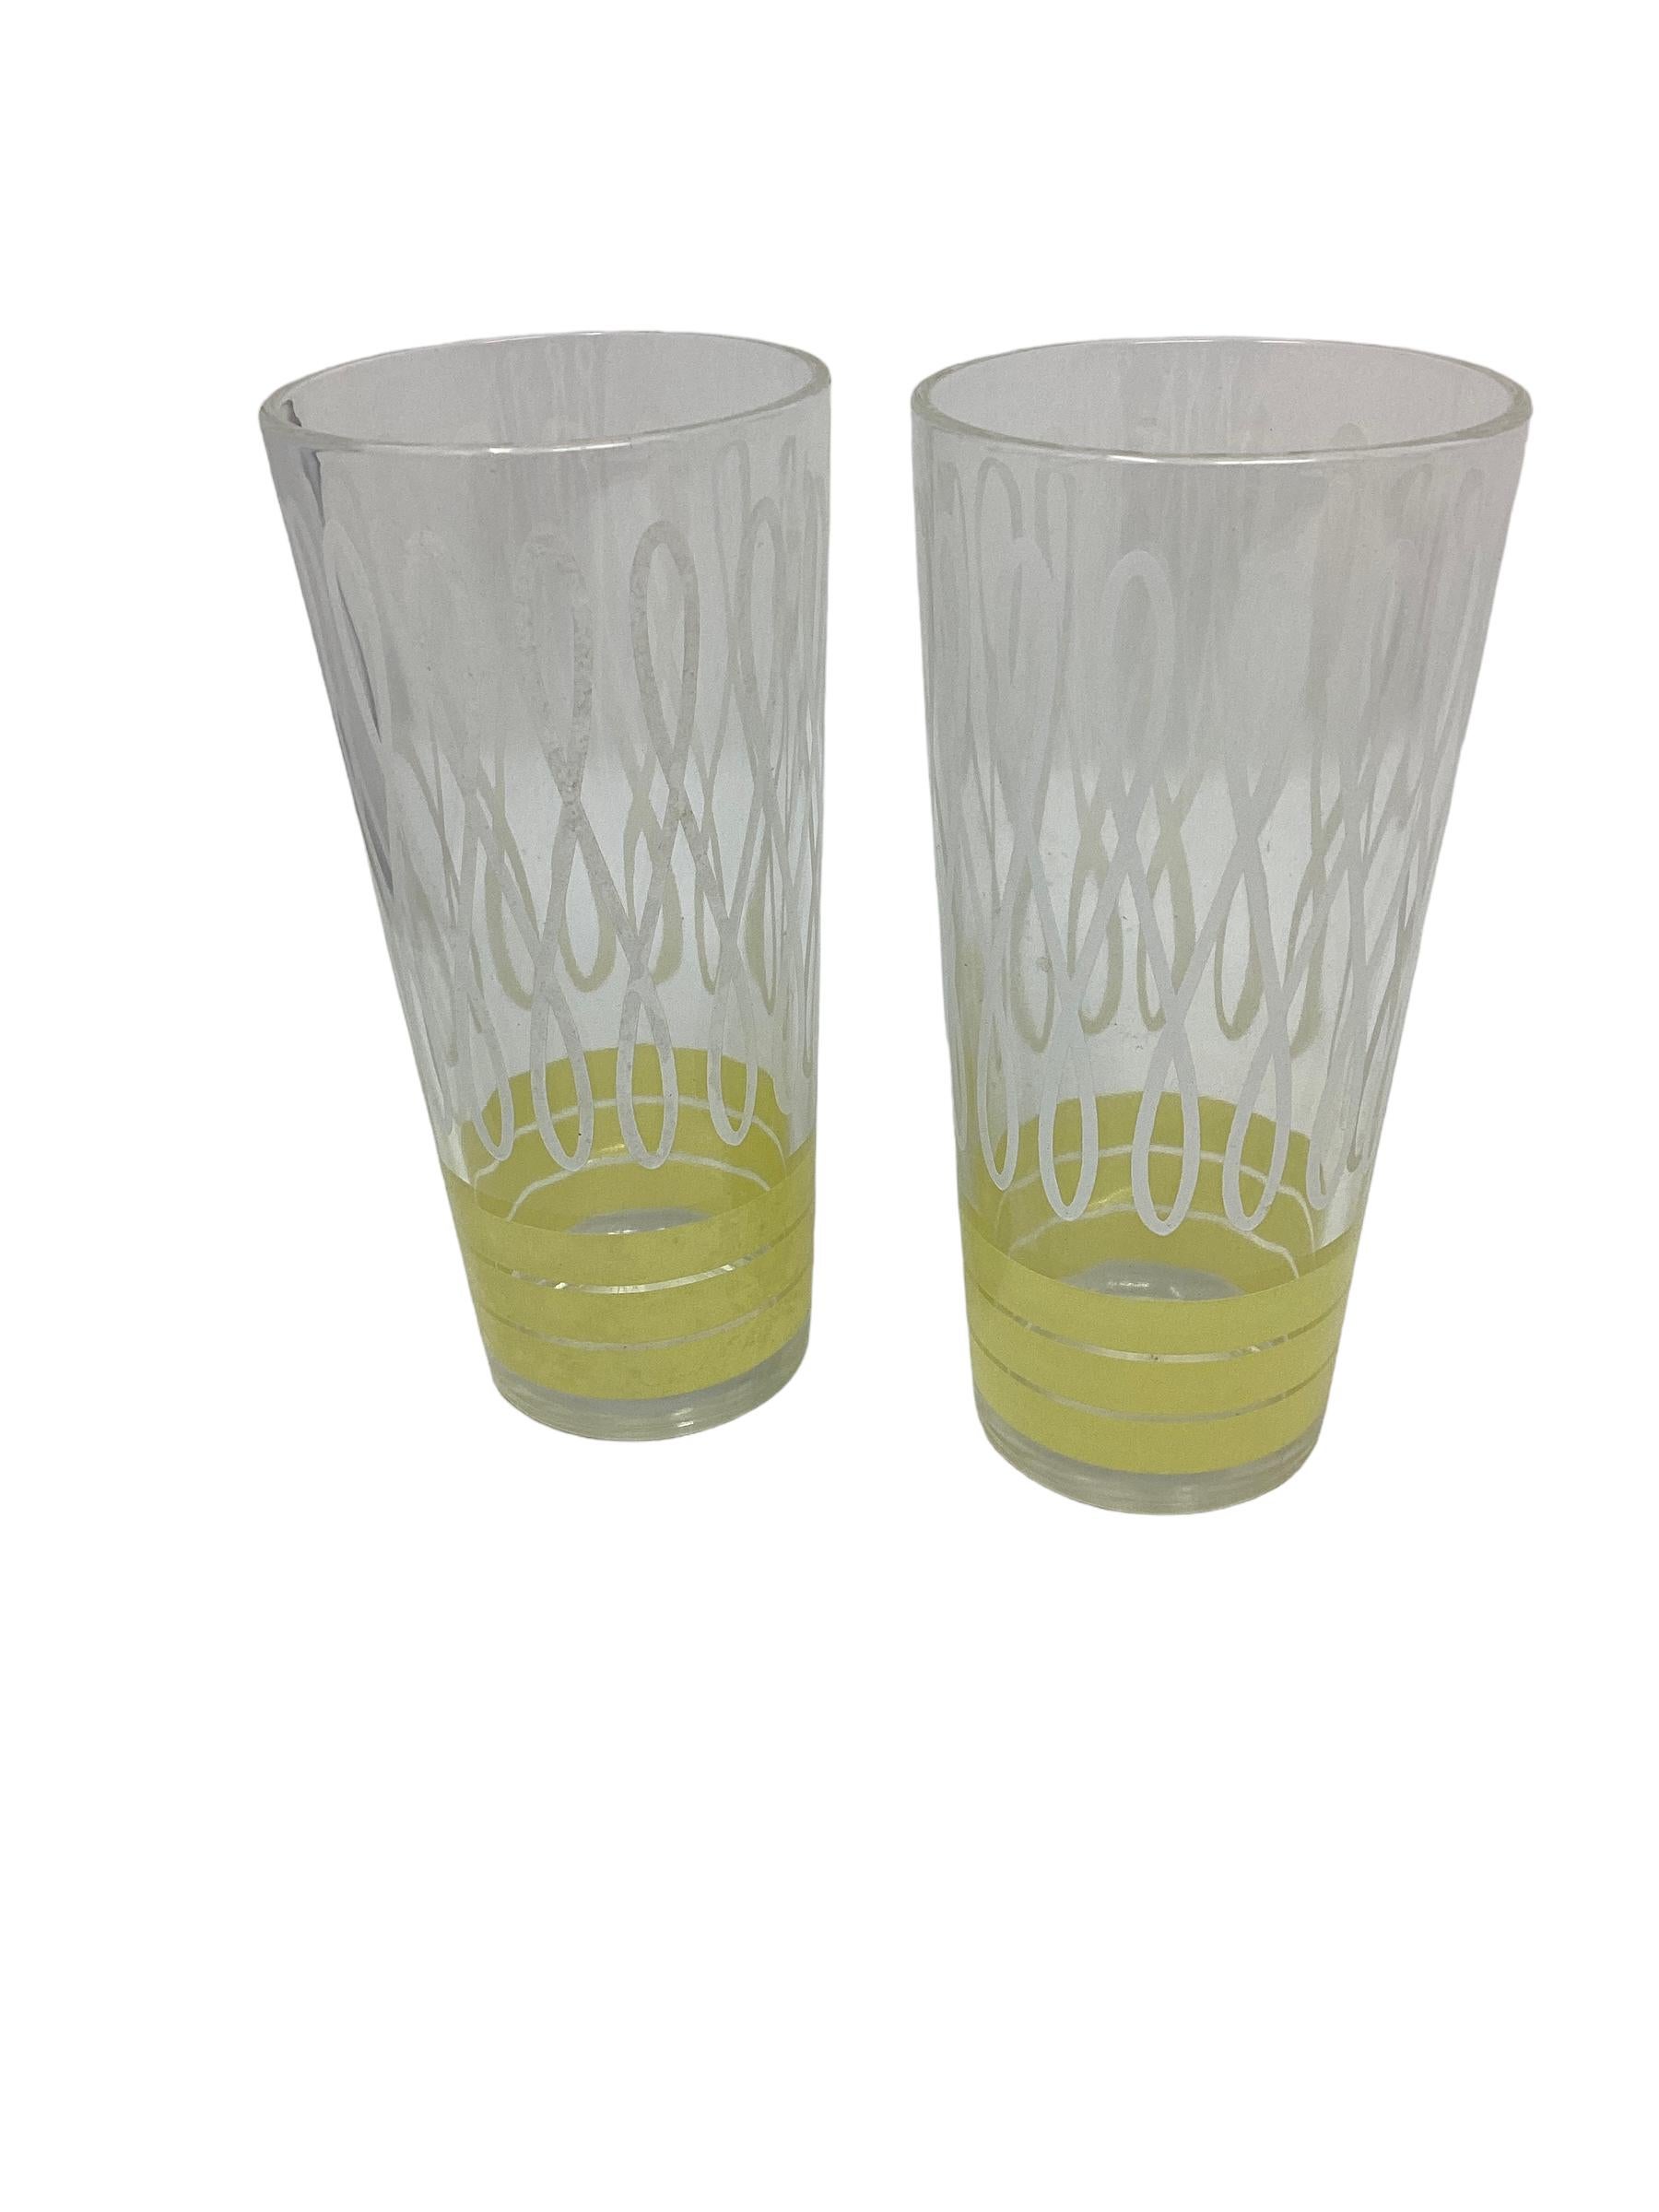 American Set of 8 Vintage Tumblers with White Swirled Design and Colored Bands  For Sale